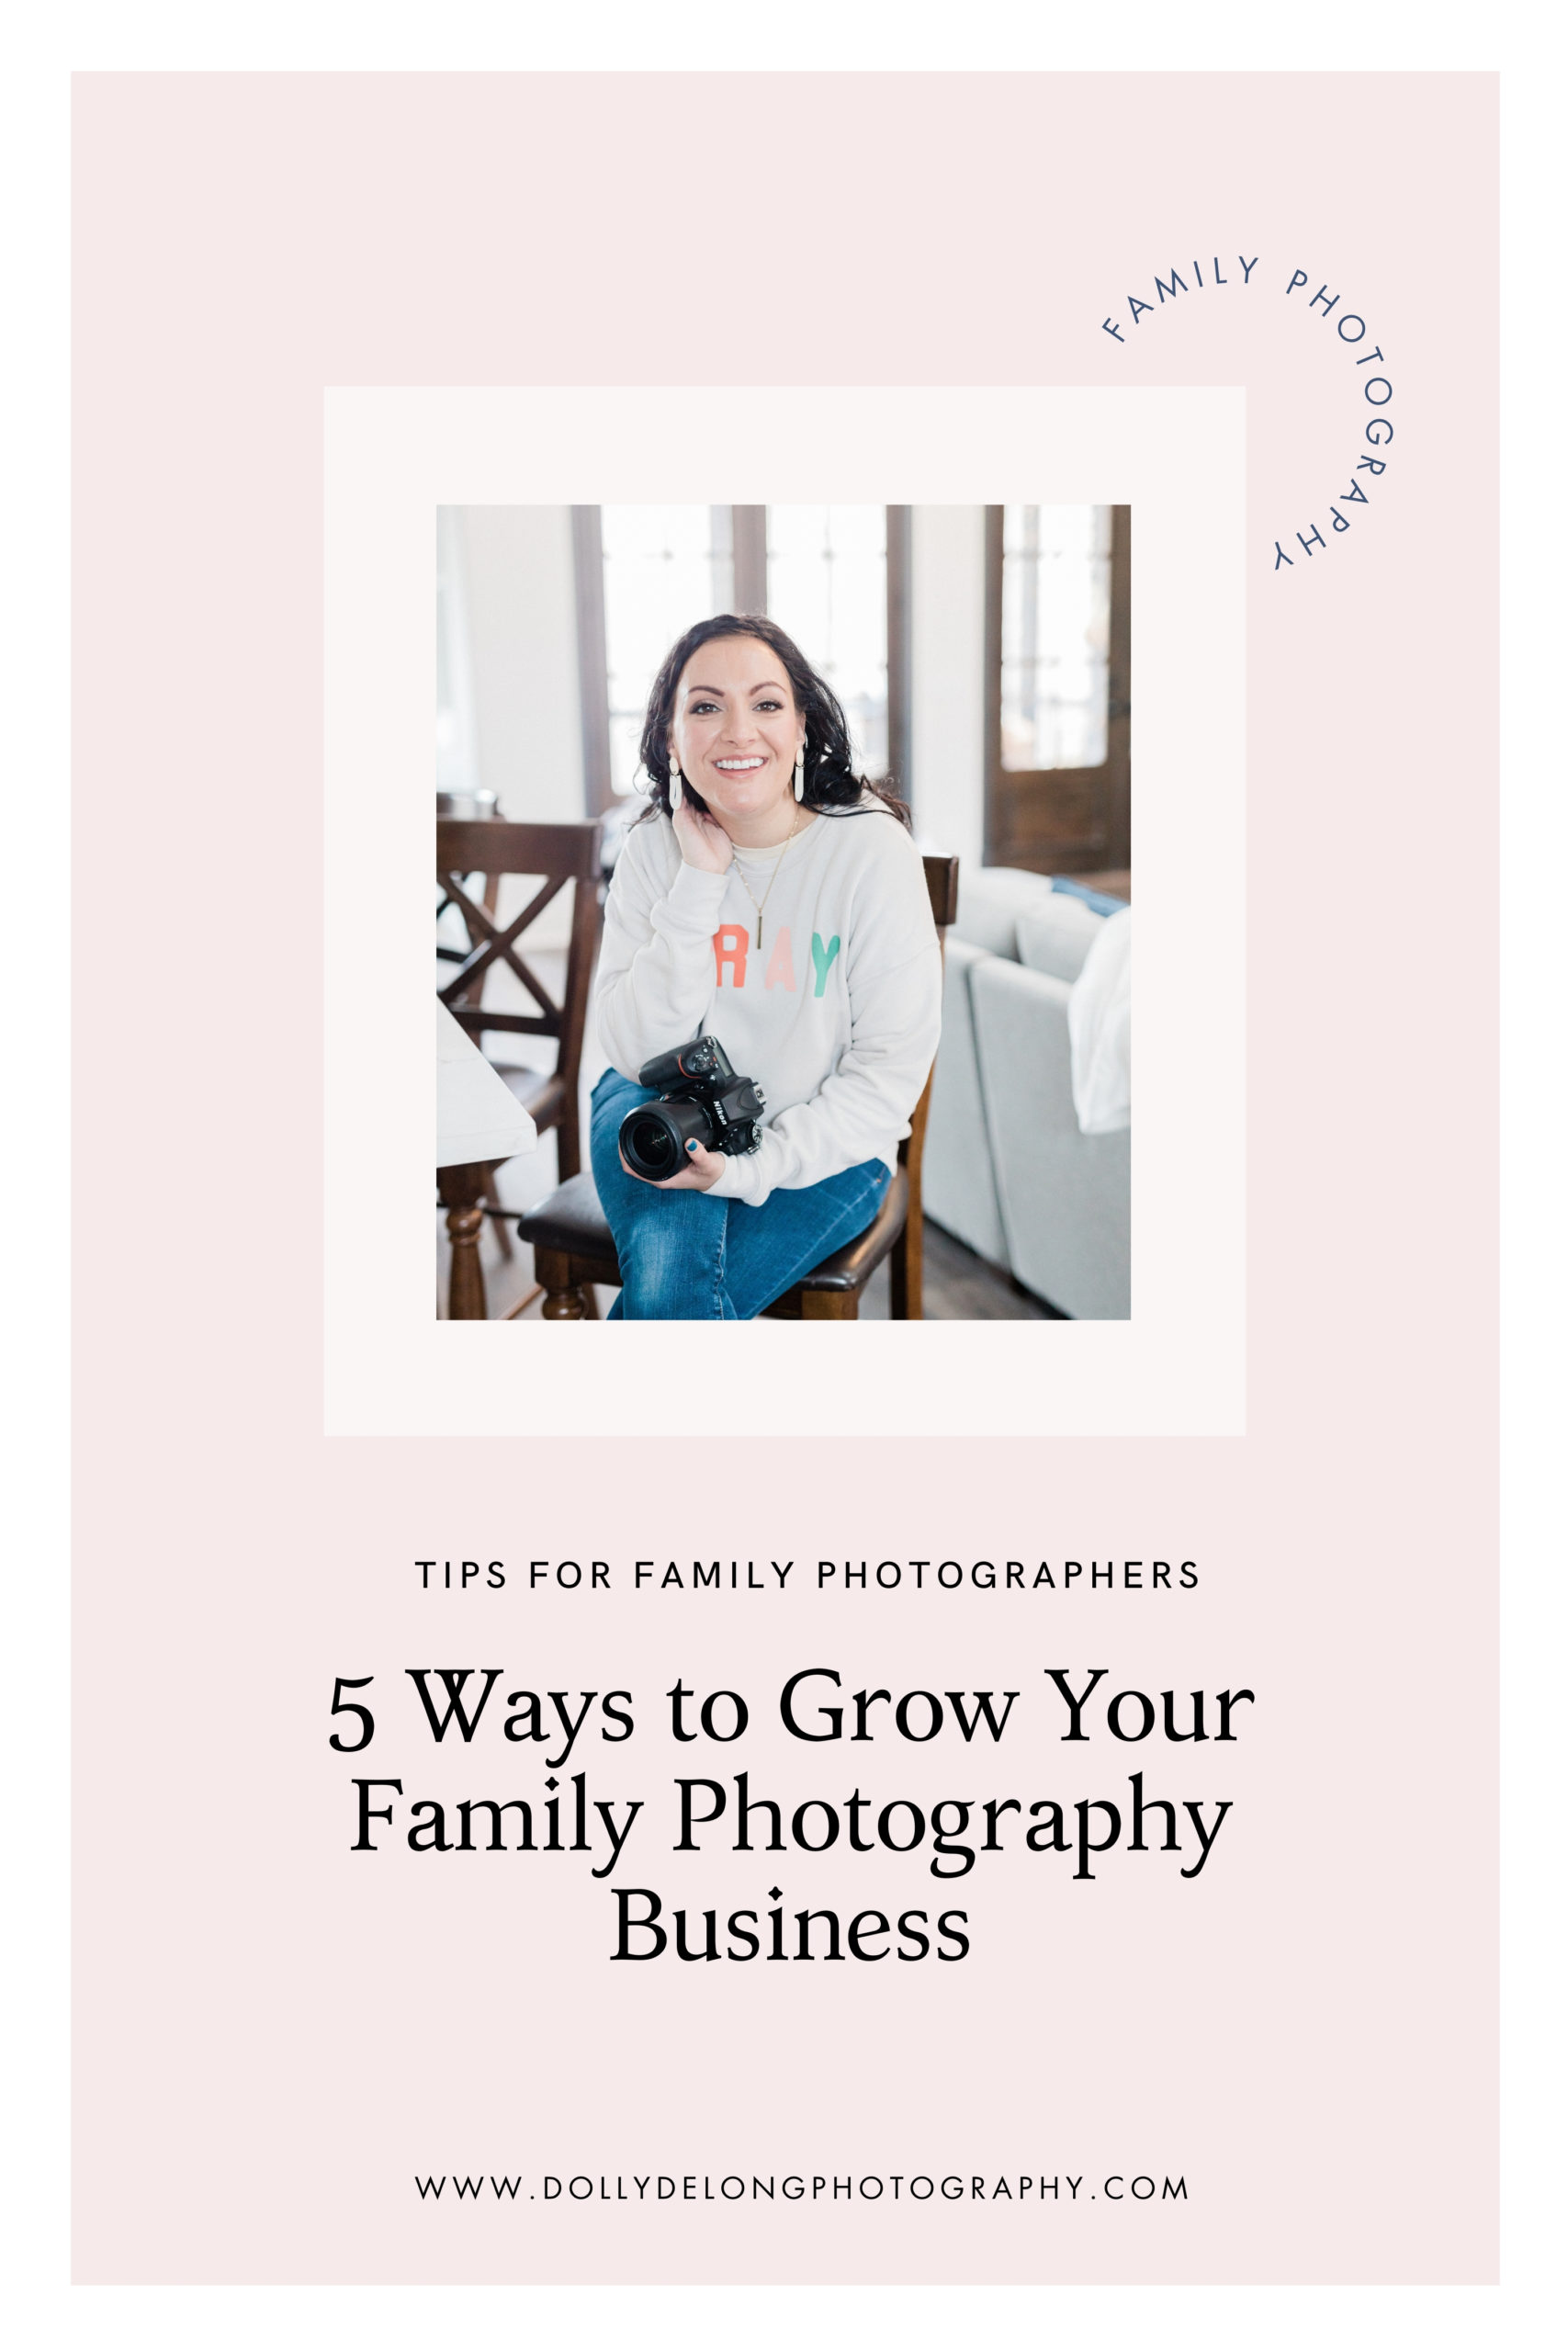 Pinterest-Pin-Image-5-Ways-To-Grow-Your-Family-Photography-Business